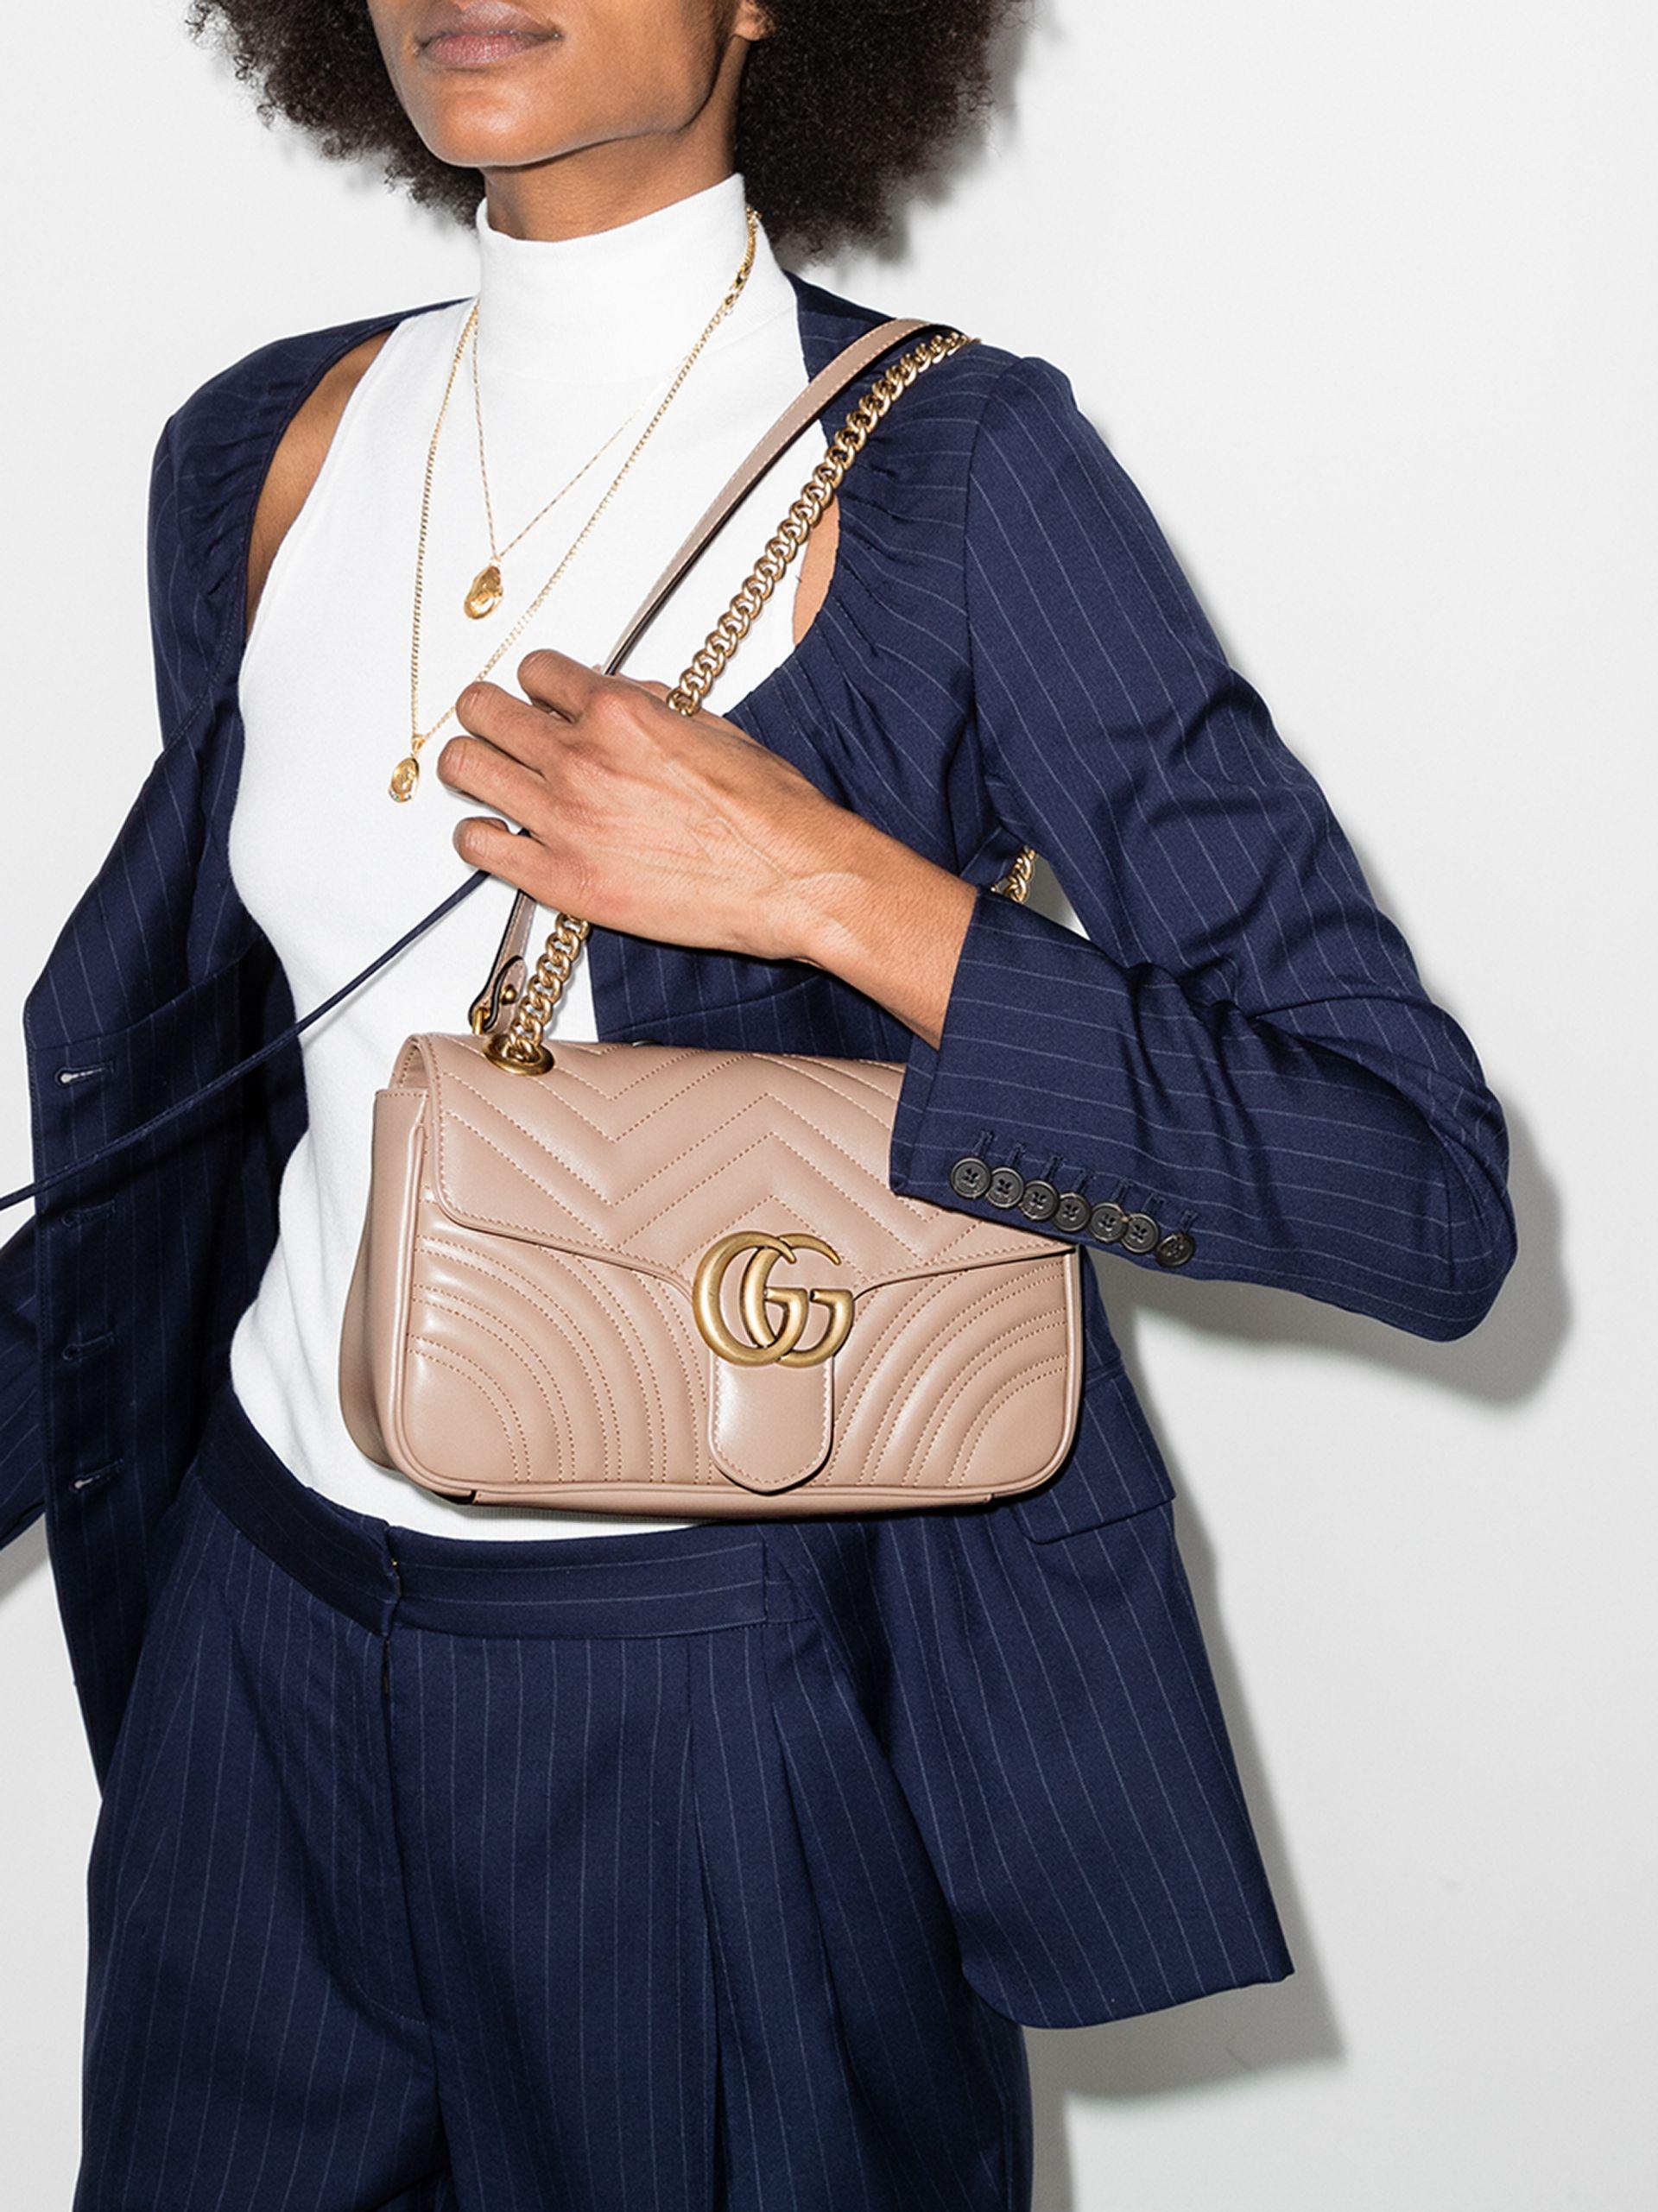 Gucci Marmont Small Matelasse Shoulder Bag in Dusty Pink - Bags